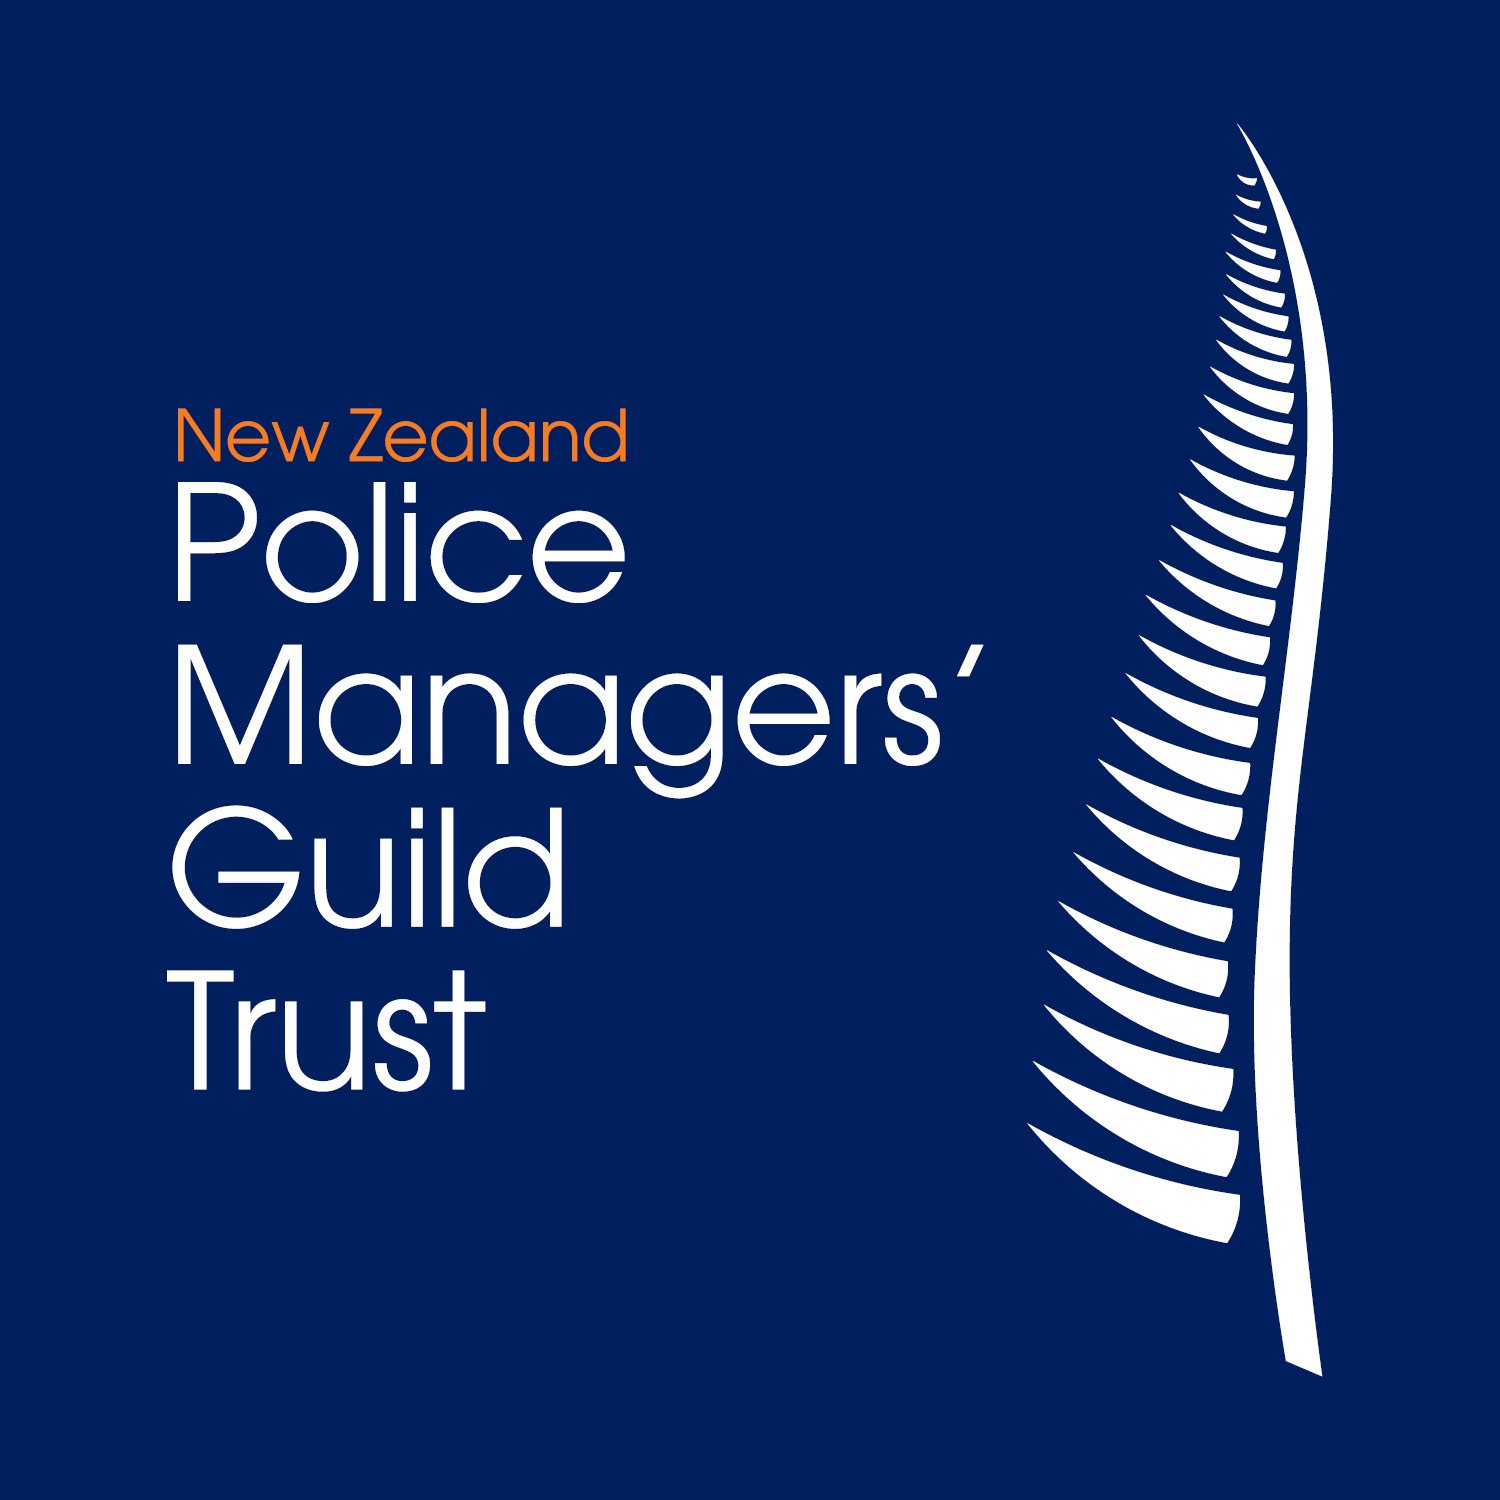 NZ Police Managers Guild Trust